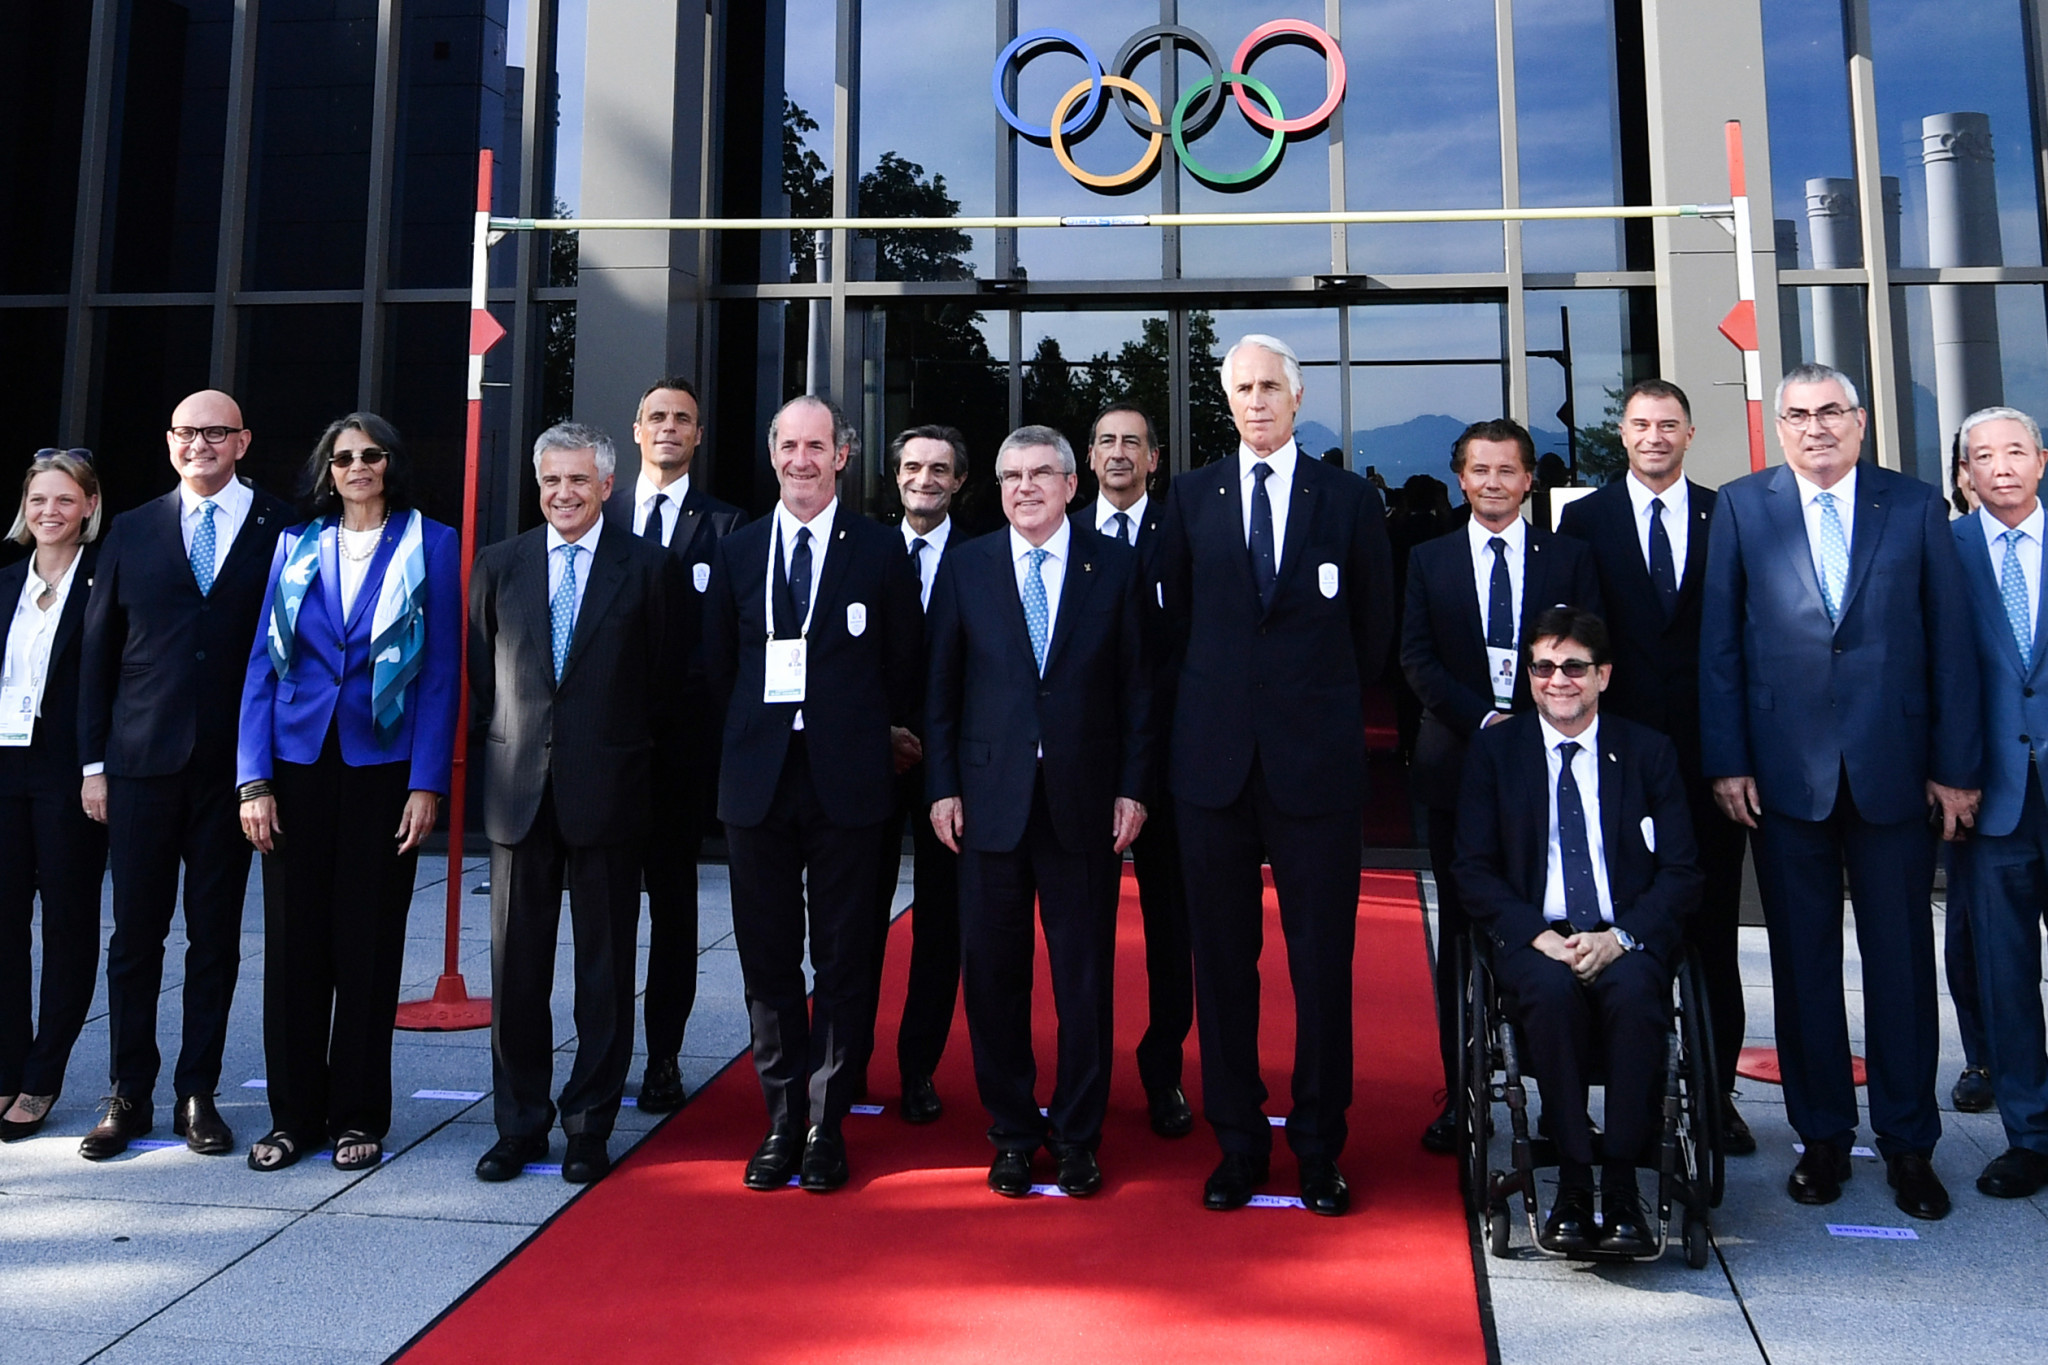 The Milan Cortina 2026 team held a meeting with the IOC this evening ©Getty Images